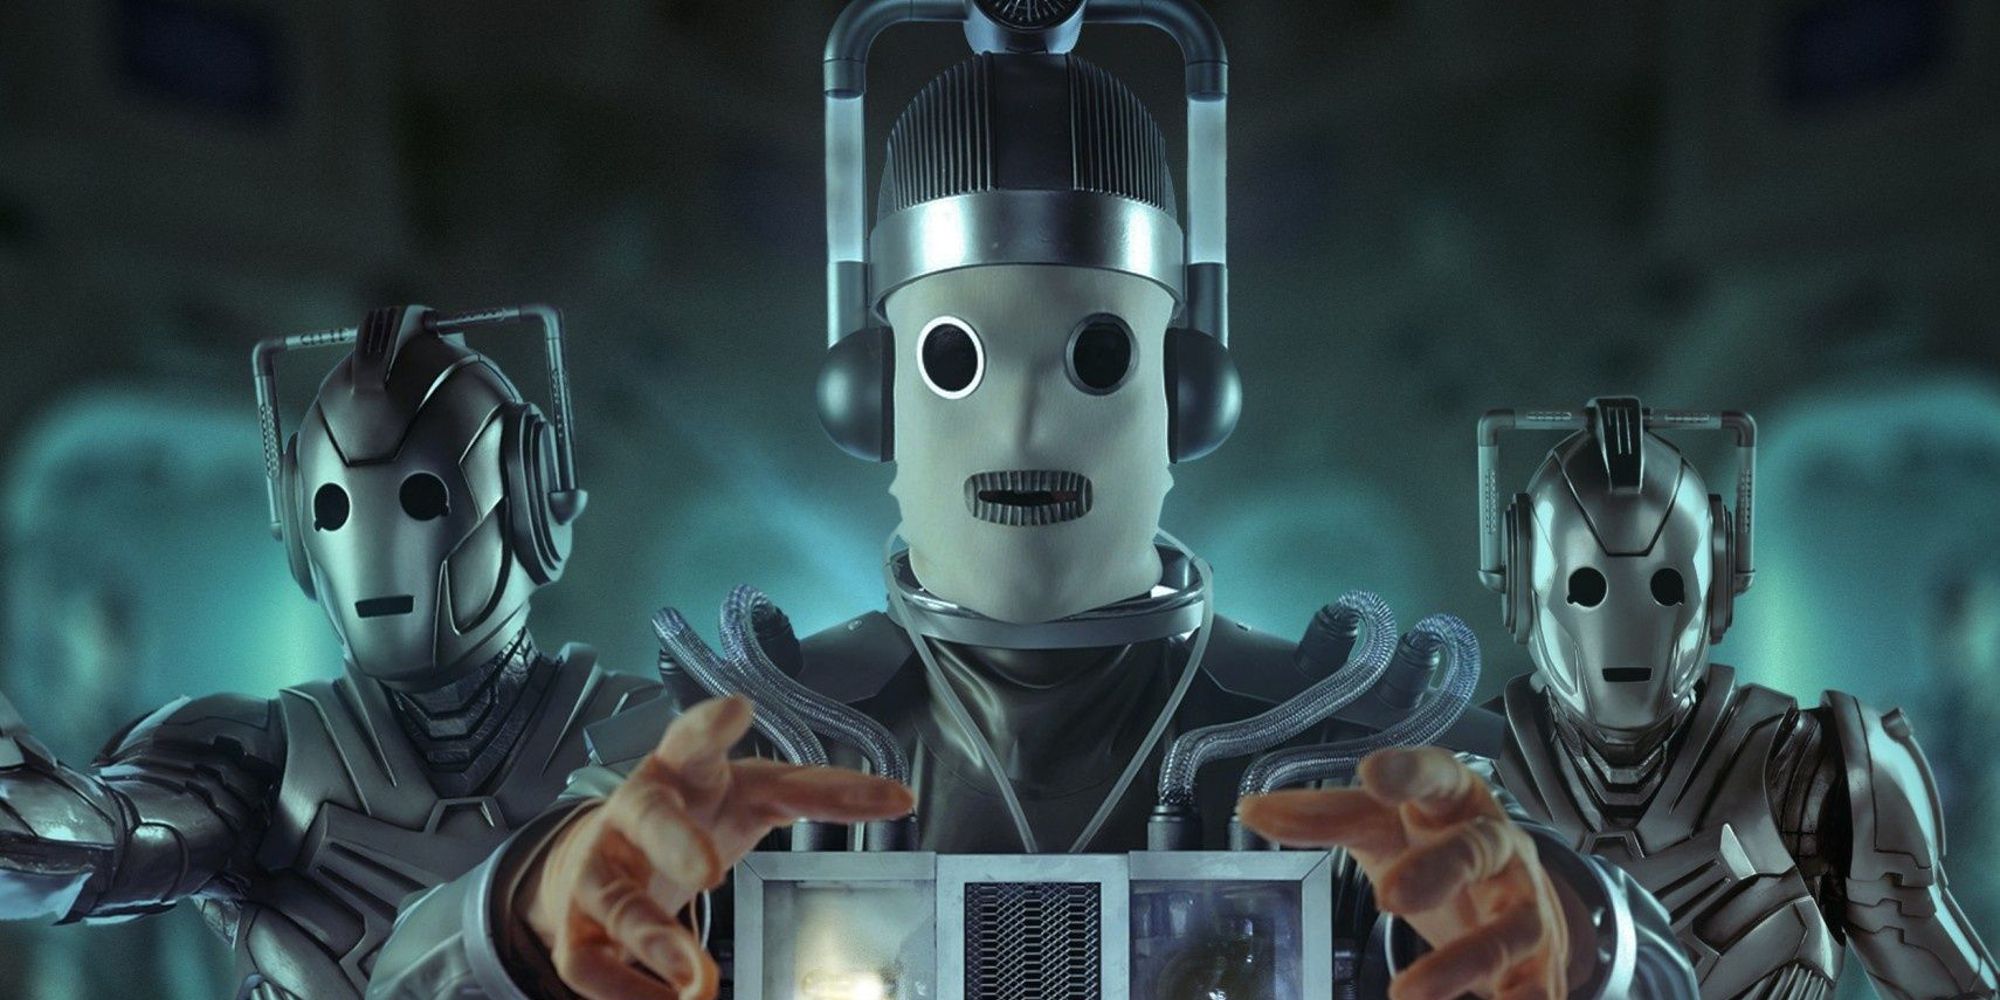 New and old Cybermen together in promo image for Doctor Who